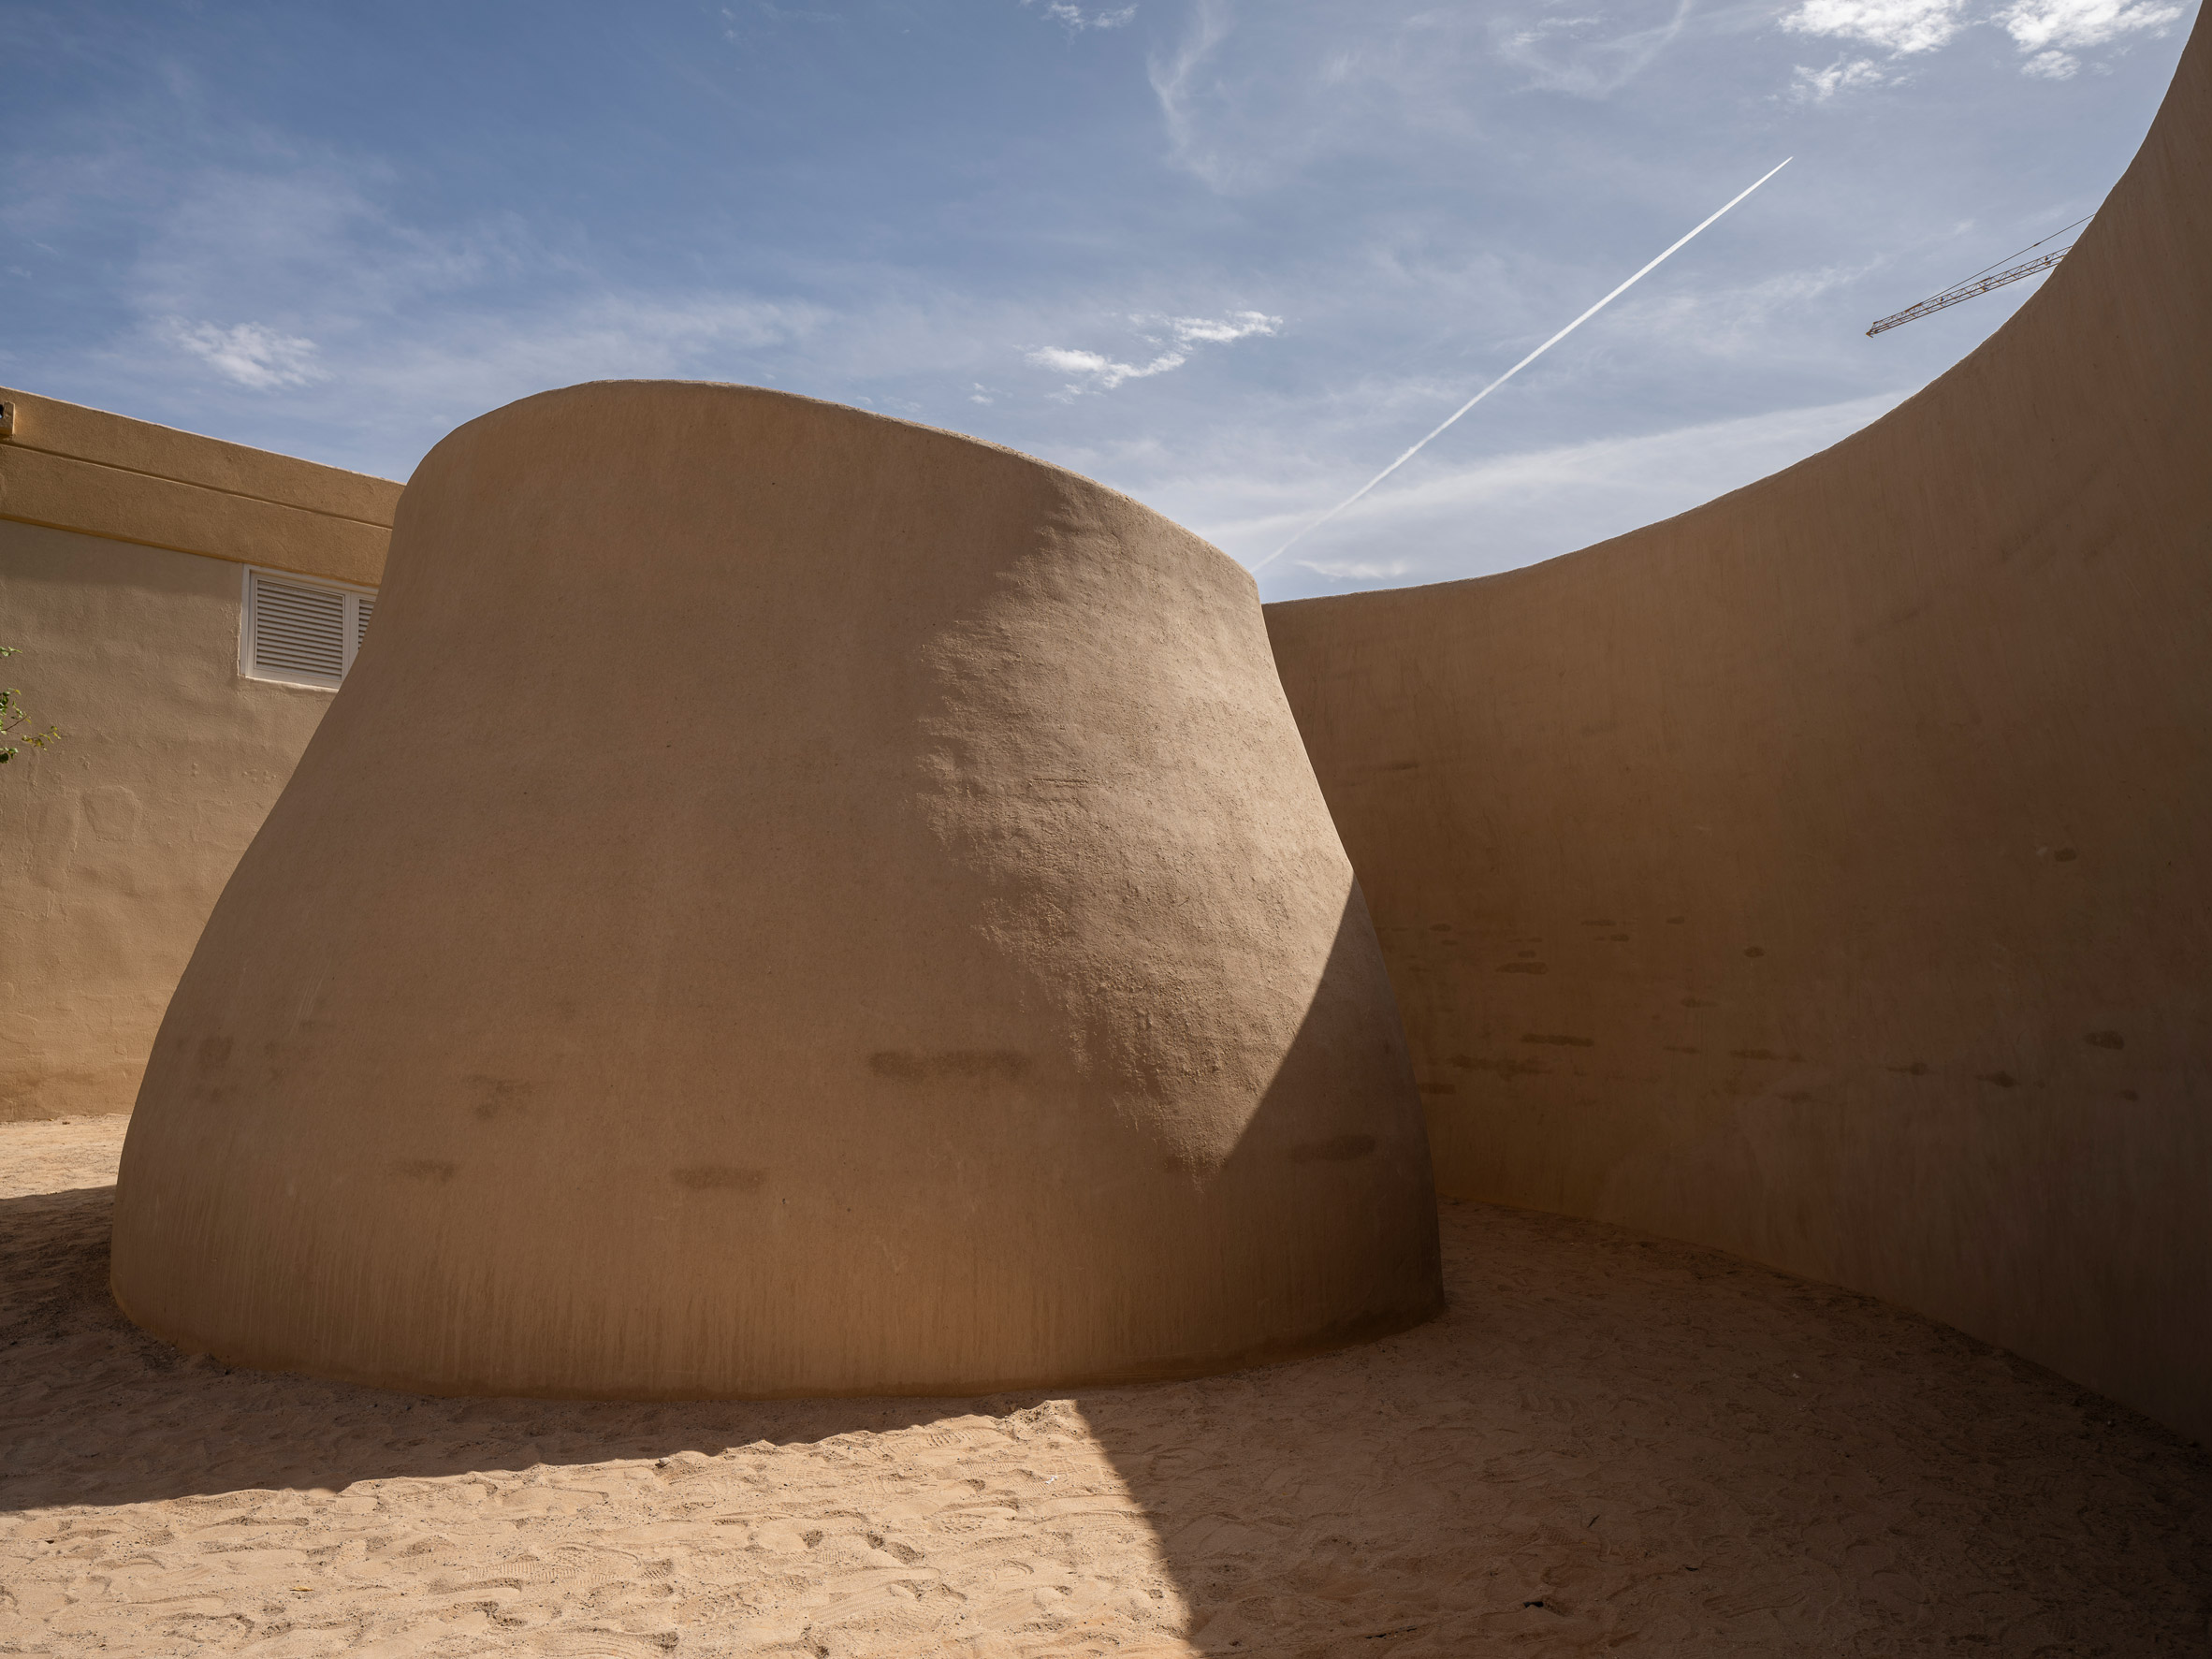 Sharjah Architecture Triennial: Earth to Earth by Sumaya Dabbagh